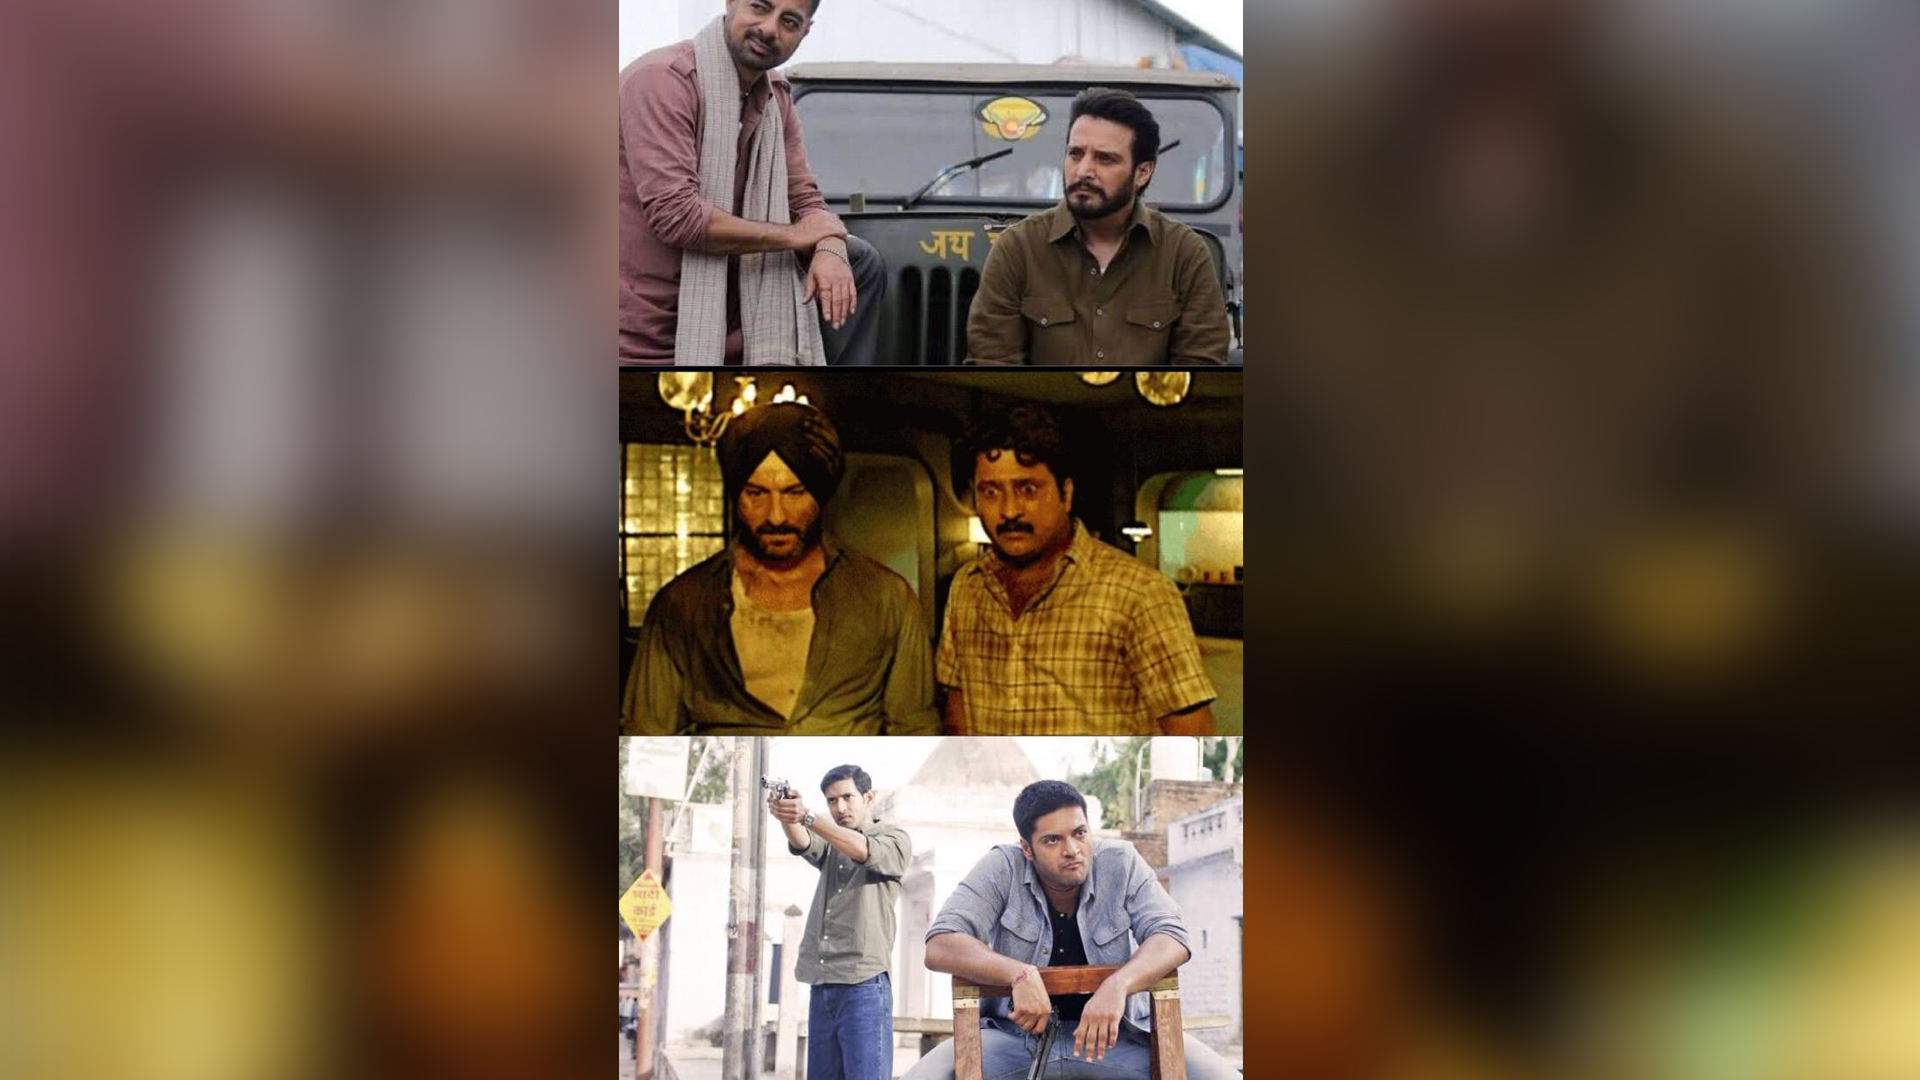 POWERFUL PERFORMANCES BY SUPPORTING CAST BUILDS THE NARRATIVE IN CRIME THRILLERS –RANGBAAZ, SACRED GAMES, and MIRZAPUR